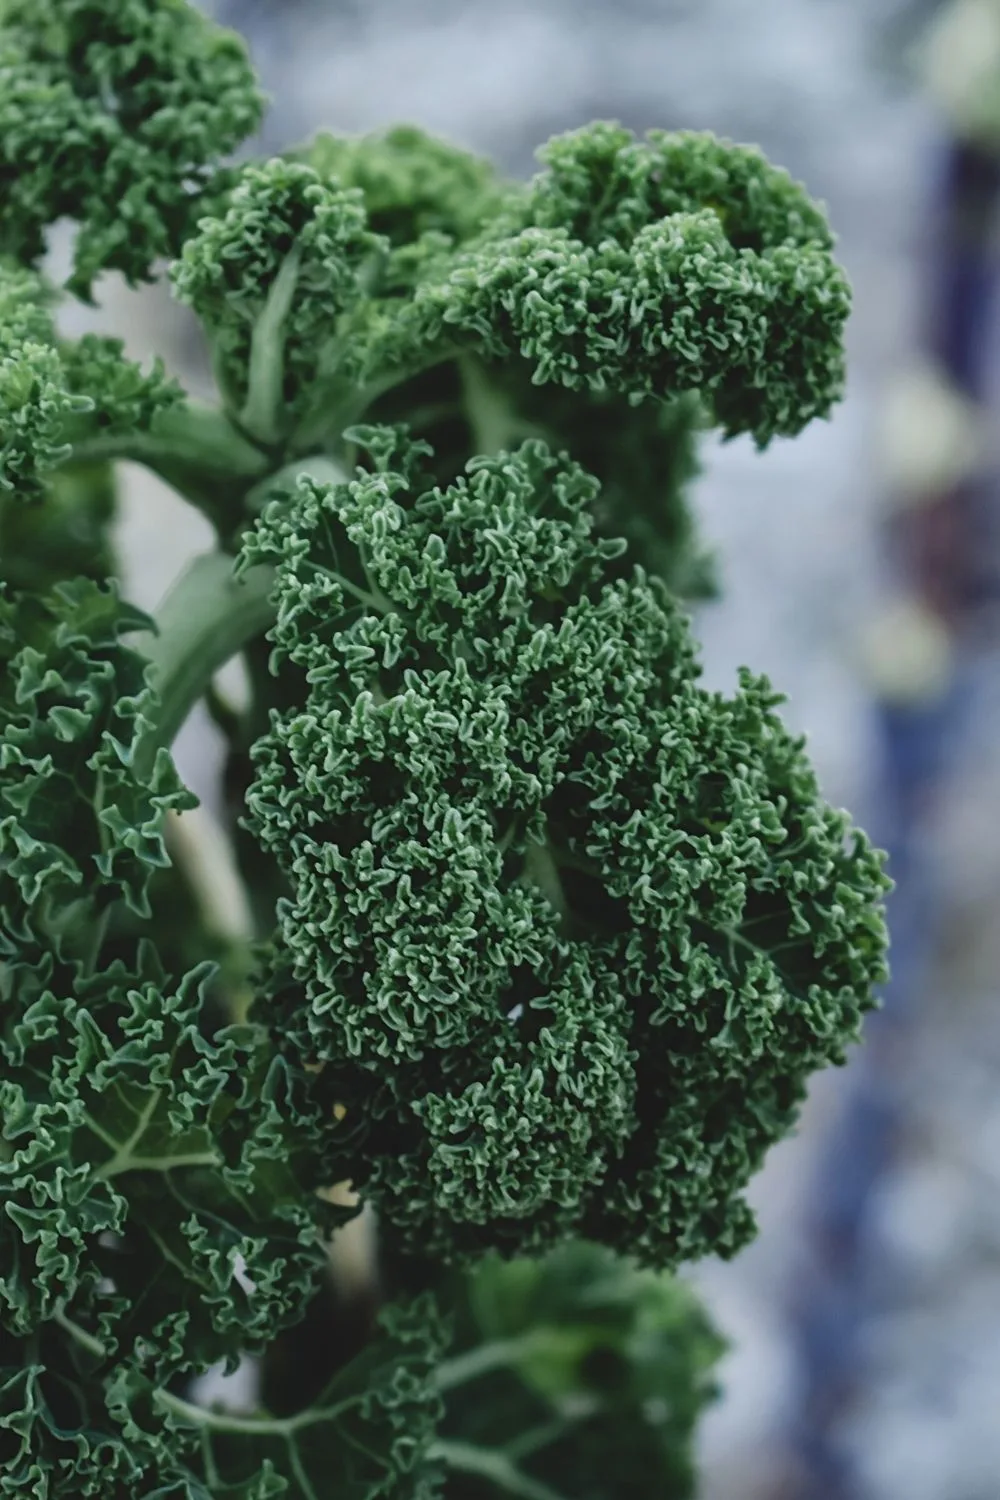 Kale is another cold-tolerant plant that you can grow in raised beds